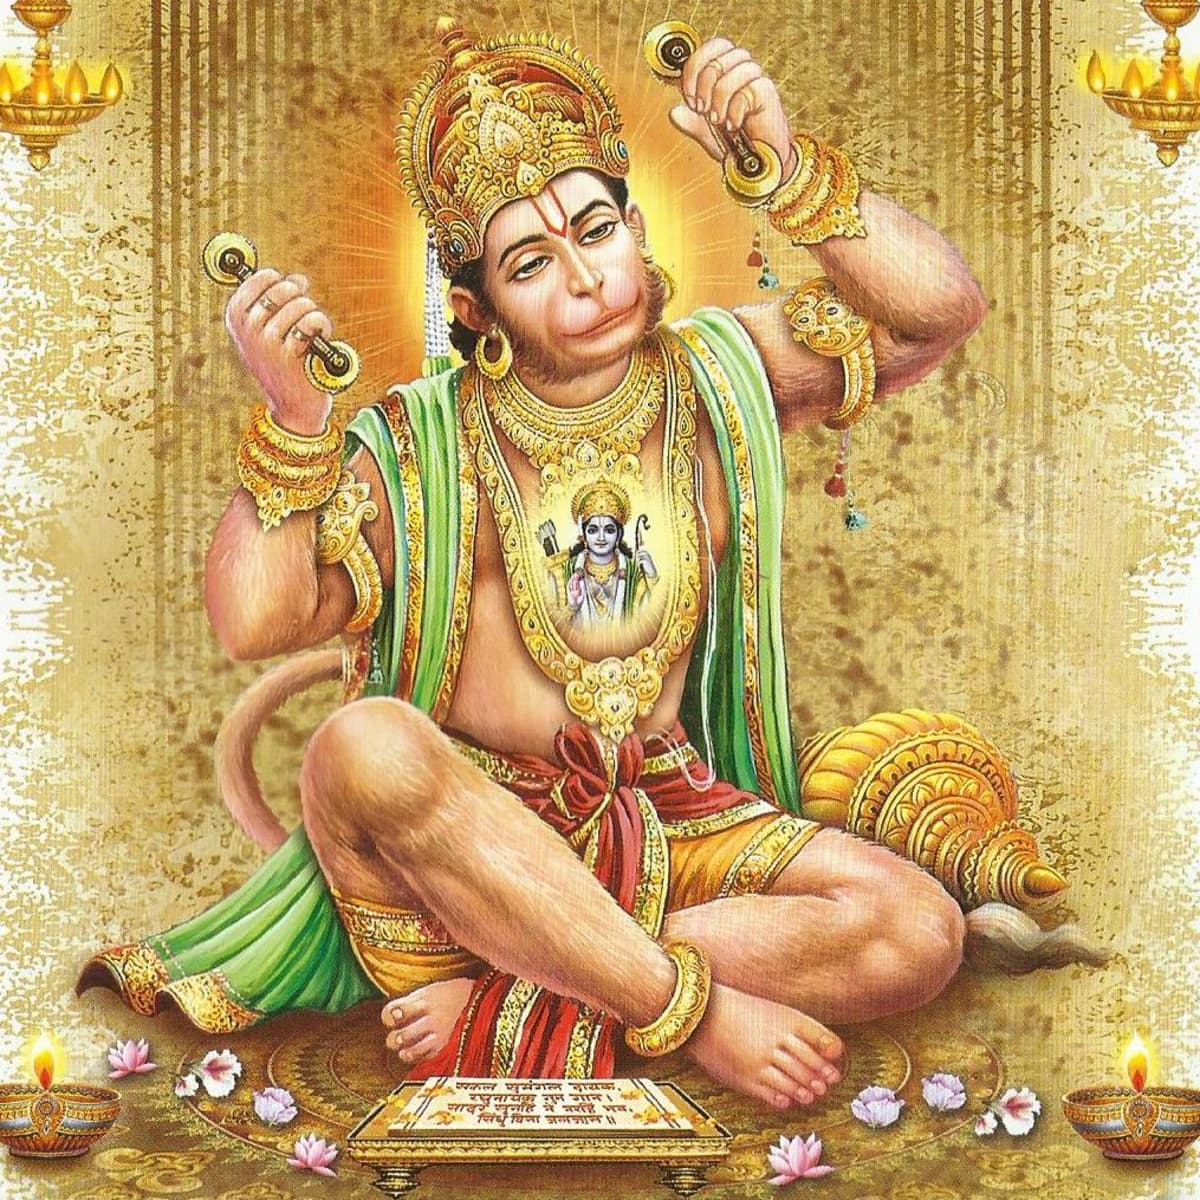 Mantras of Lord Hanuman- The incarnation of Lord Shiva - HubPages